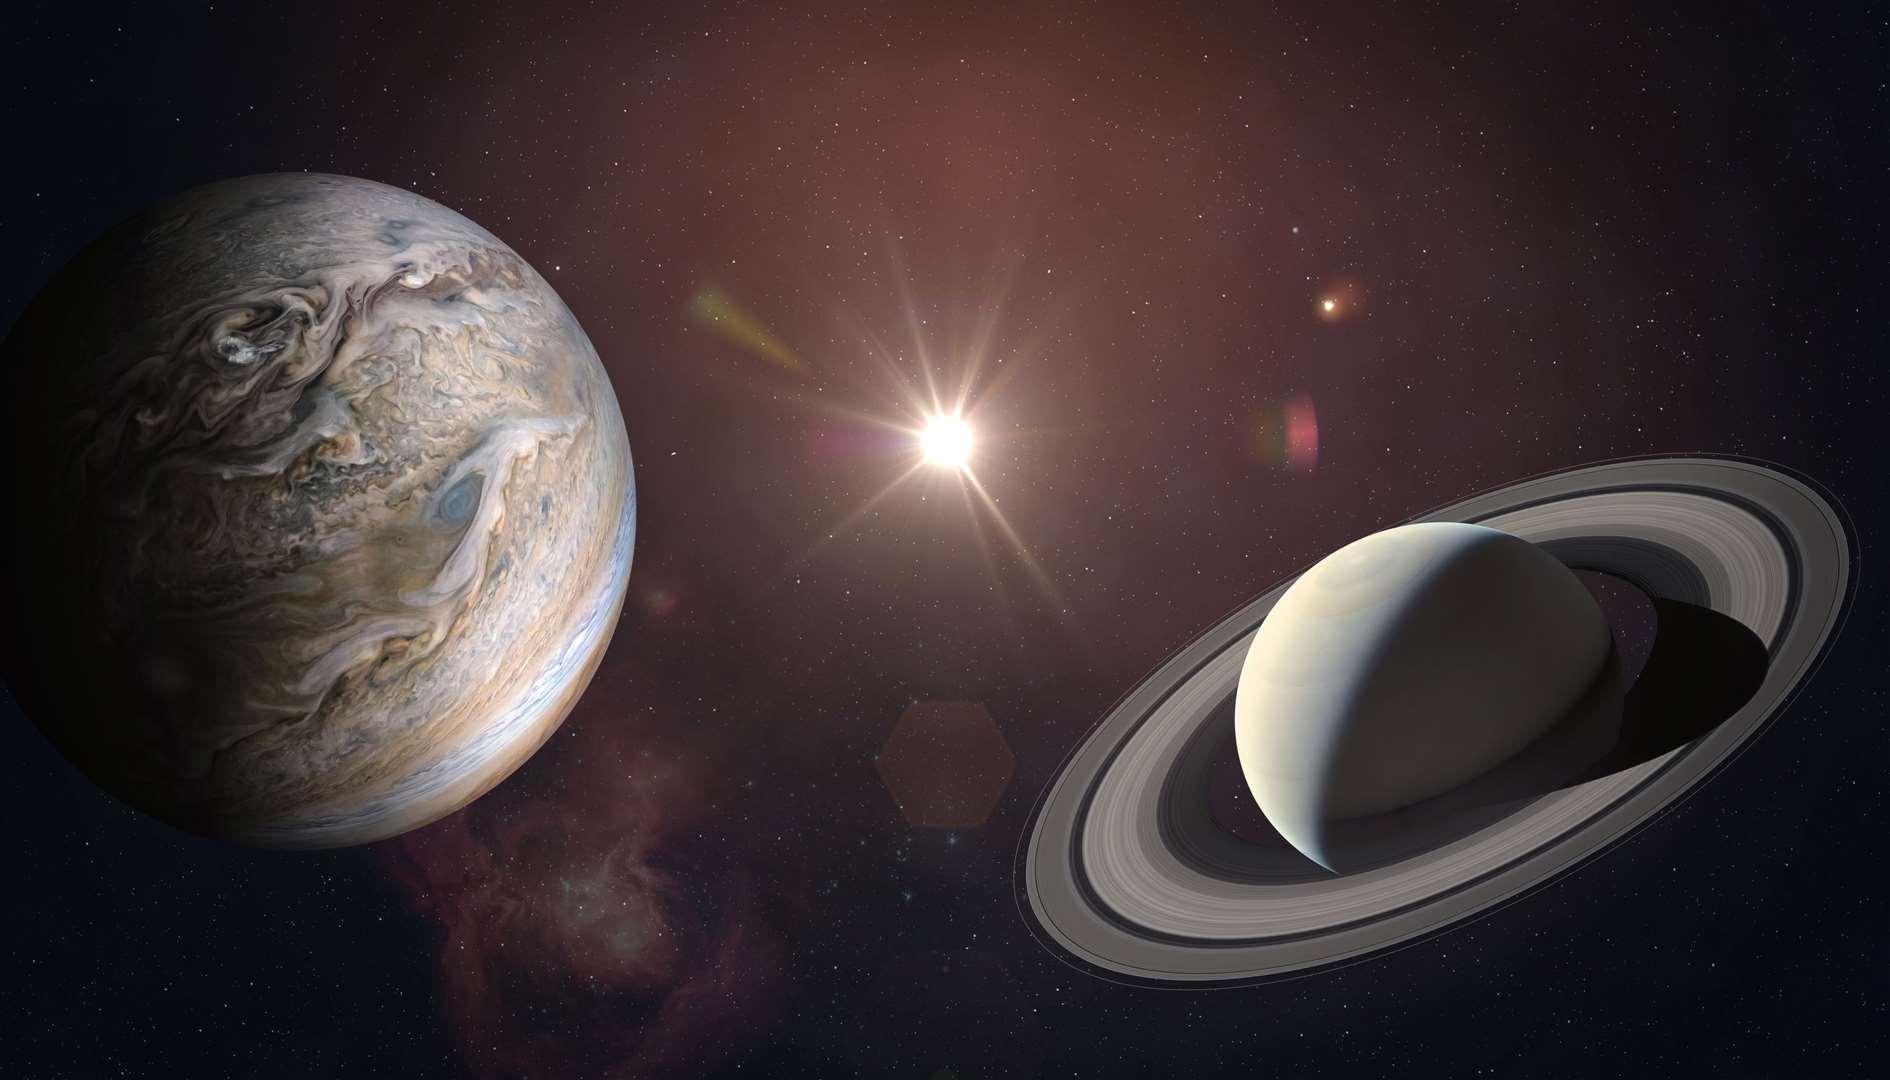 Jupiter and Saturn will appear close together as observed from Earth on December 21, 2020. Image includes elements from NASA